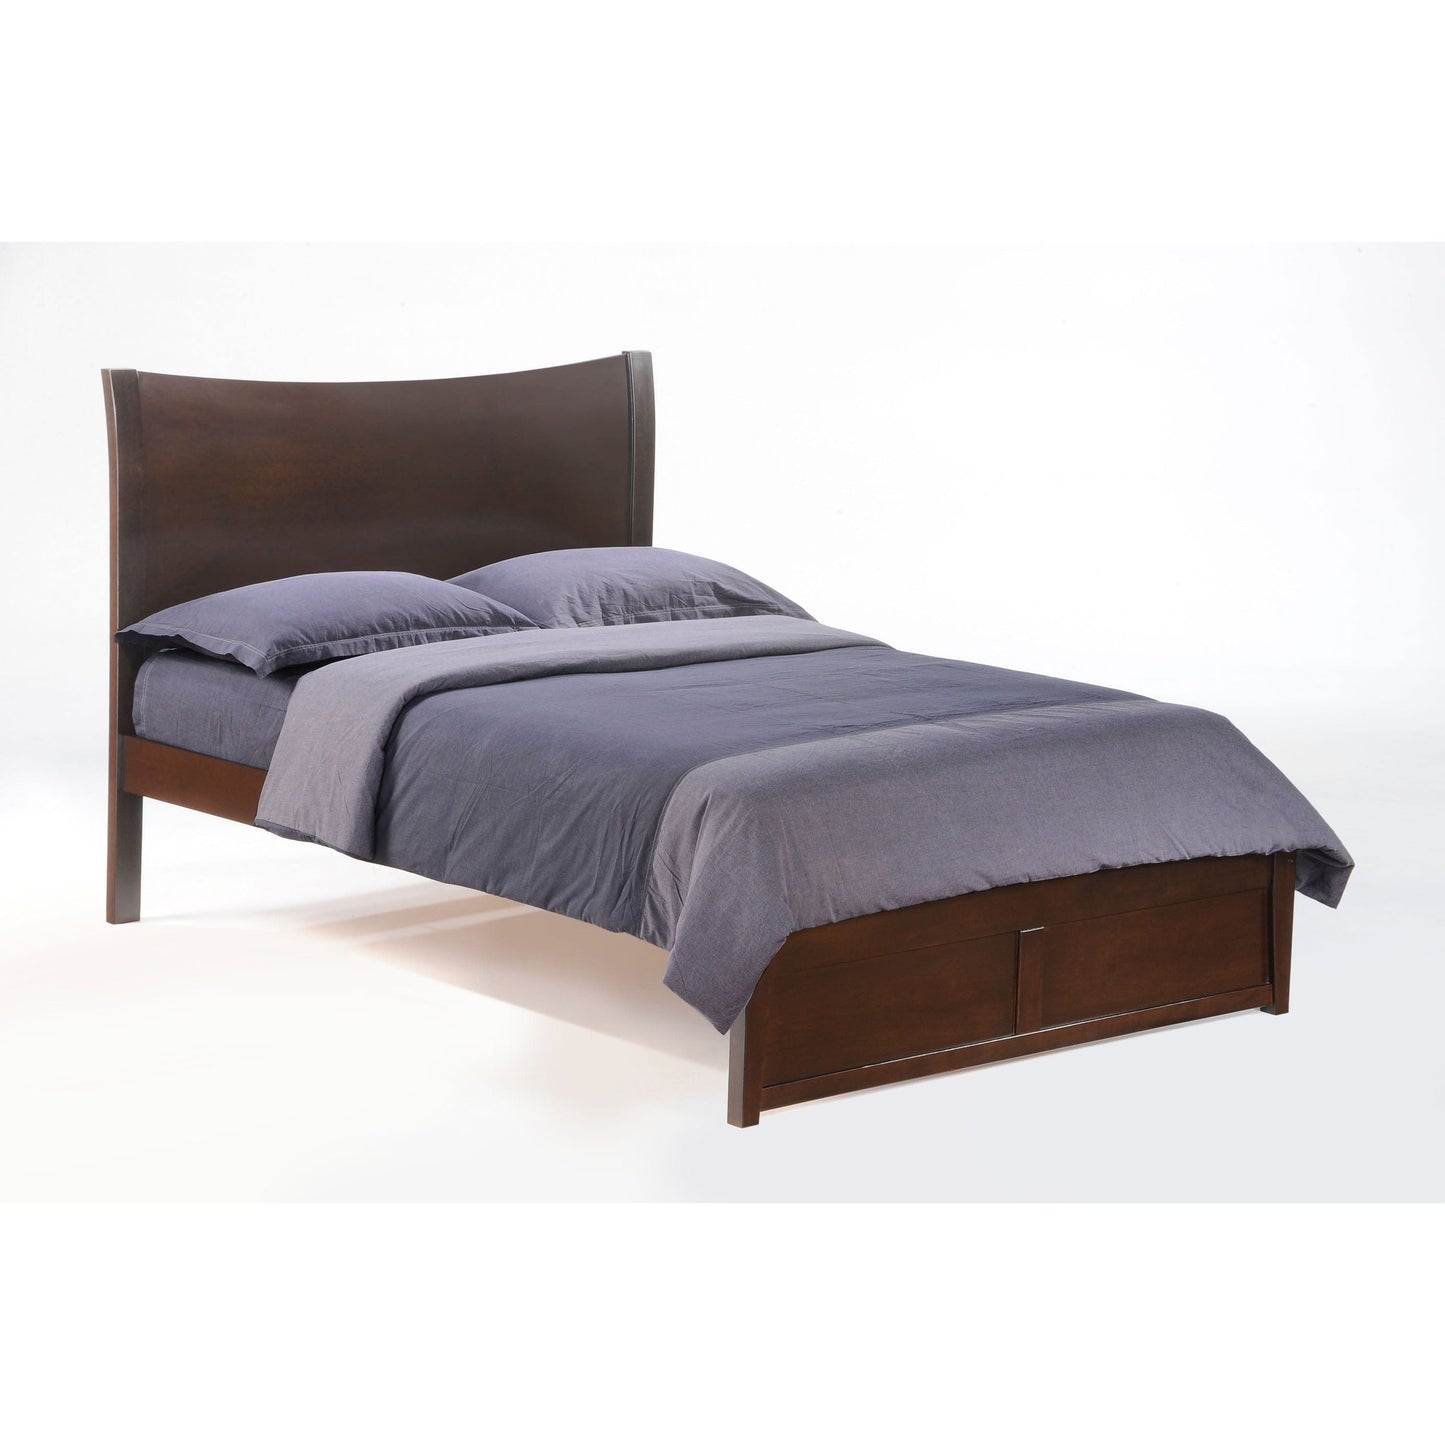 The Bedroom Emporium Twin K Series Blackpepper Bed in cherry finish Chocolate